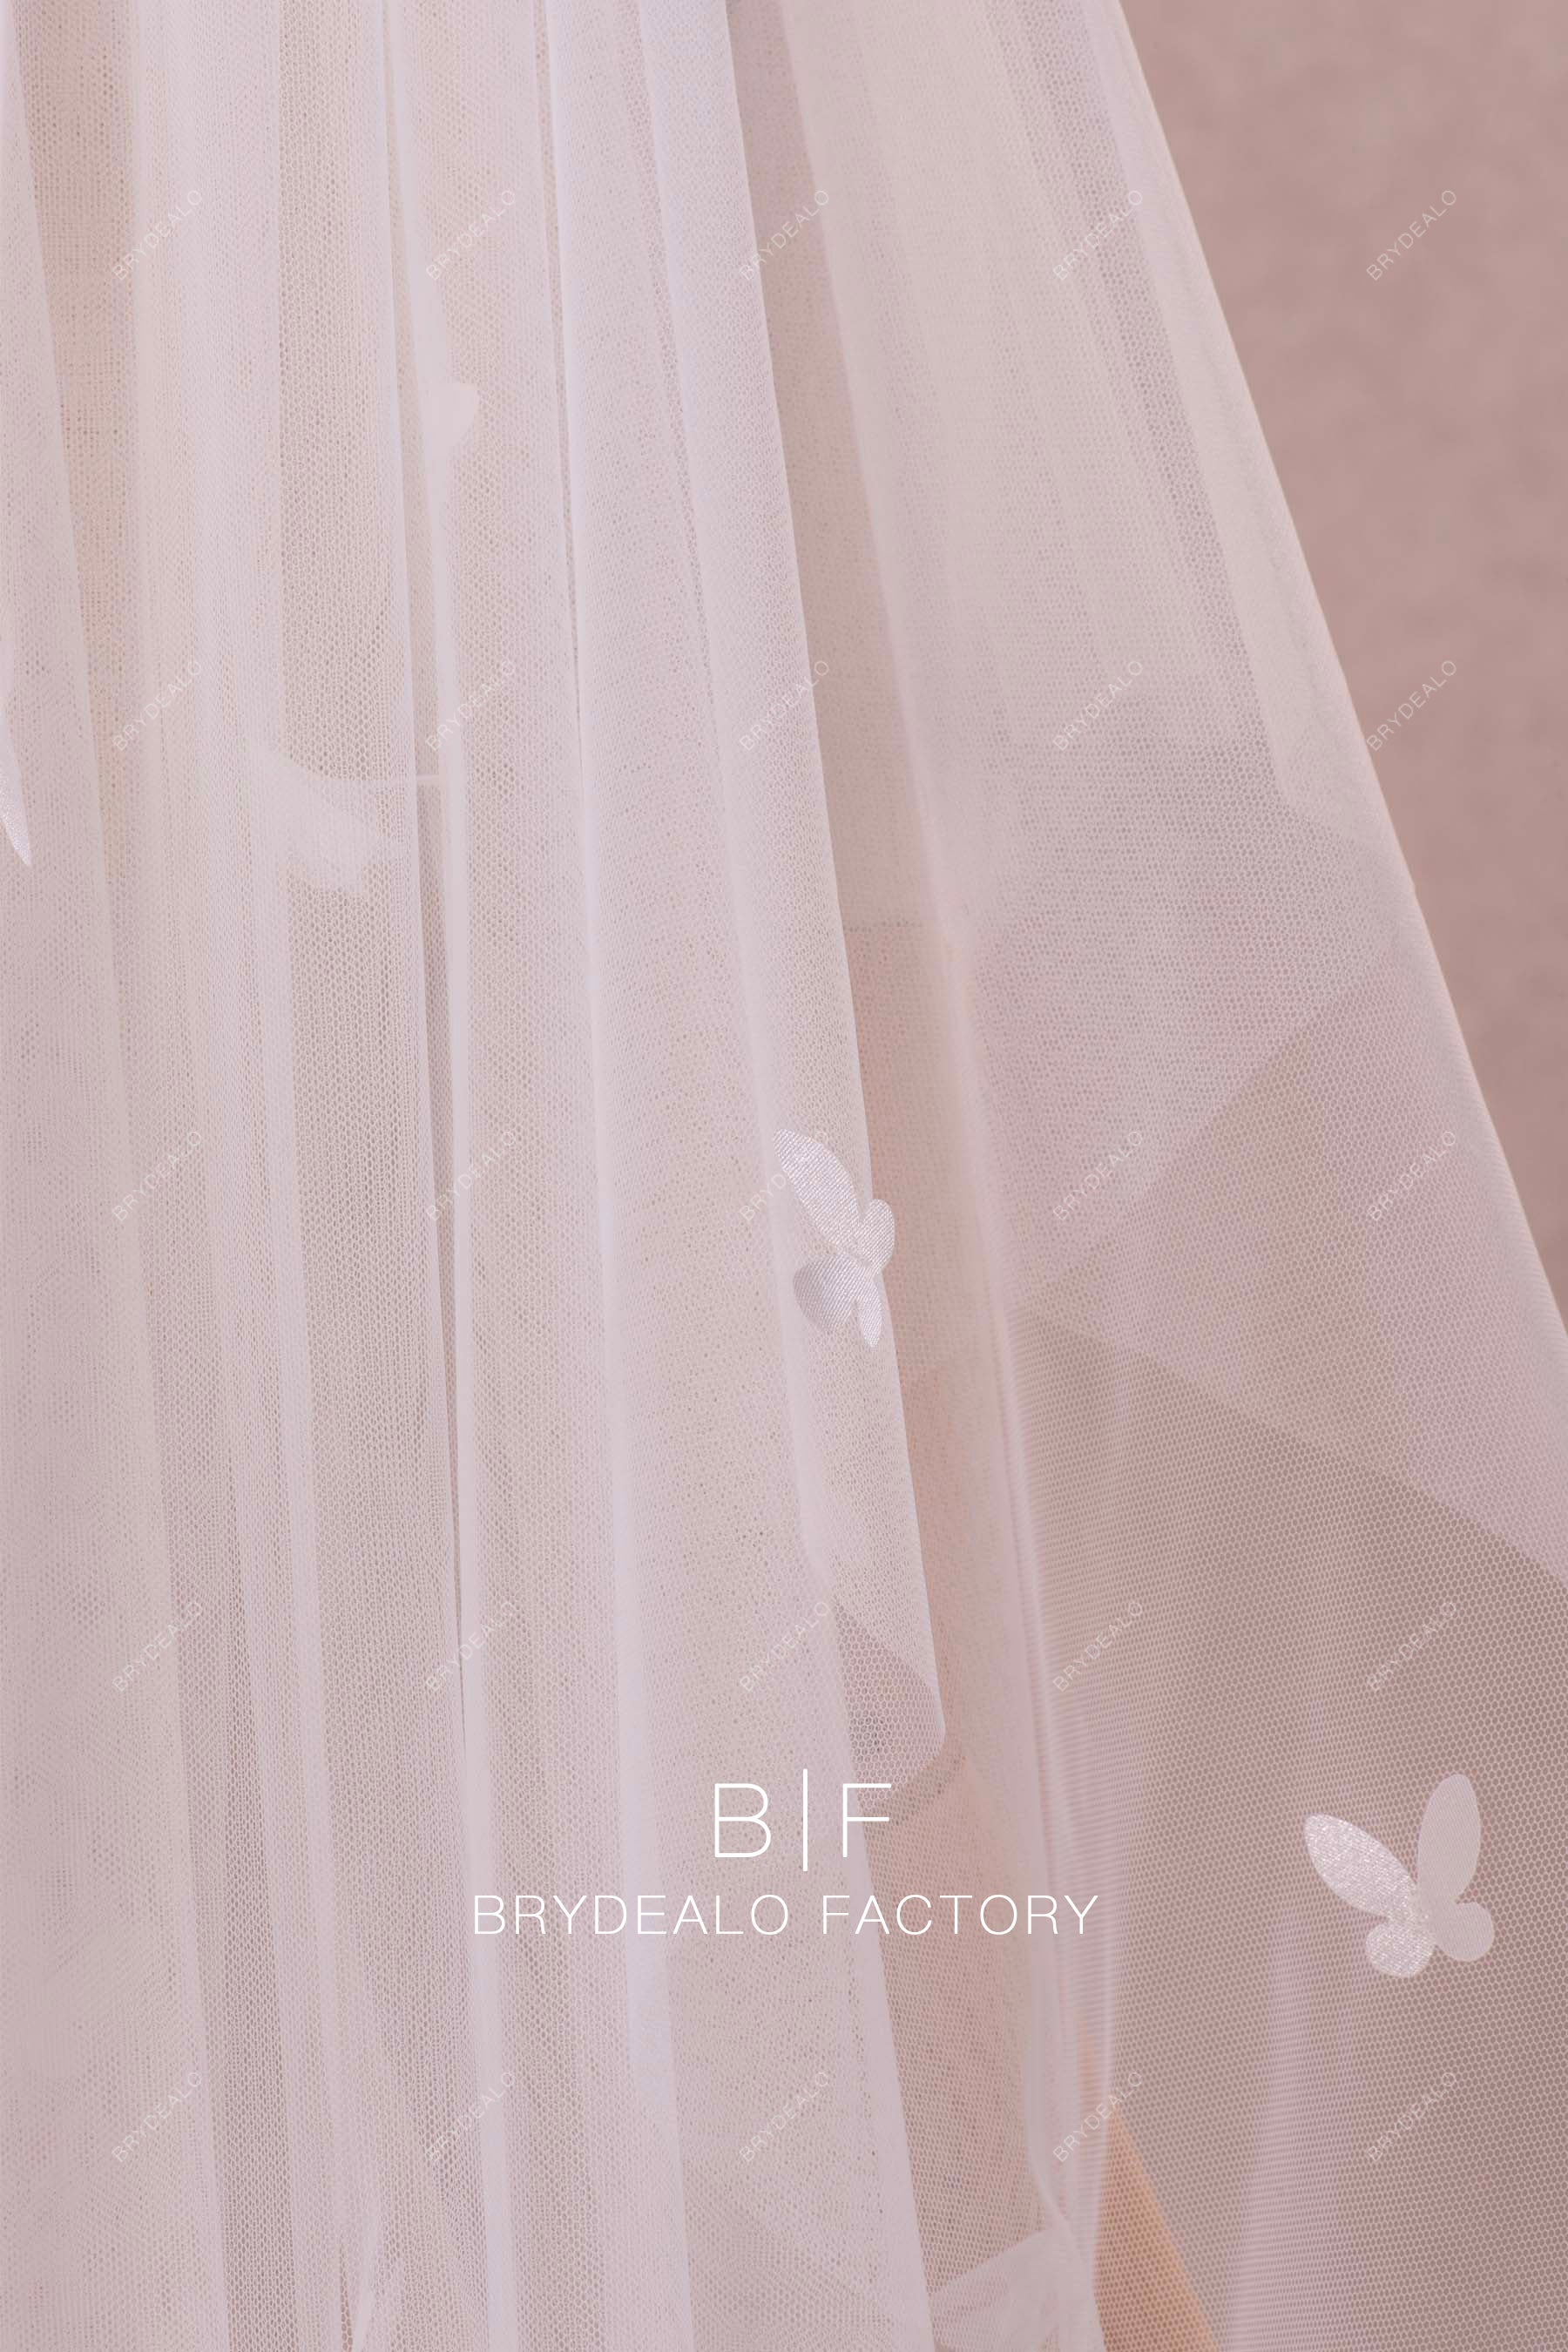 two-tier butterfly bridal veil